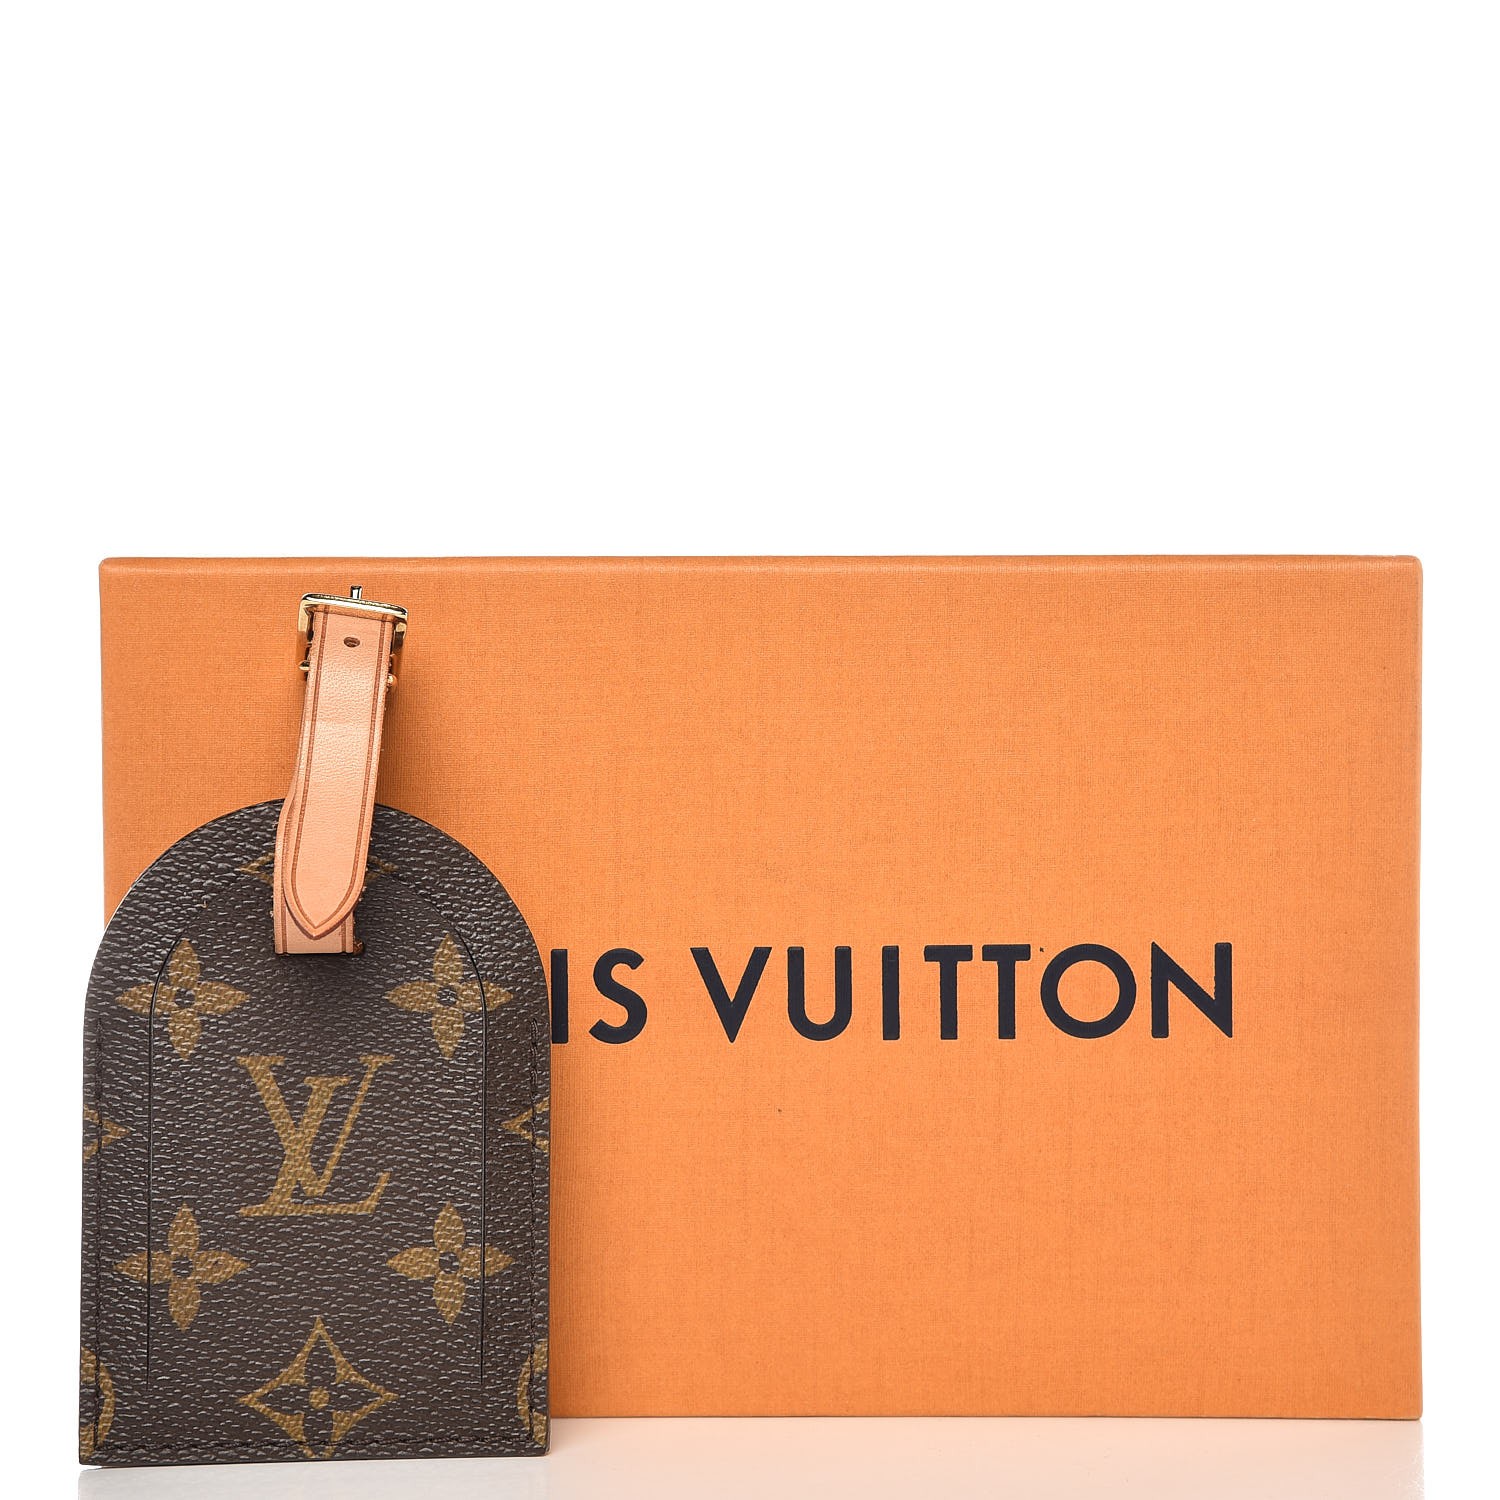 Lv Luggage Tags  Natural Resource Department